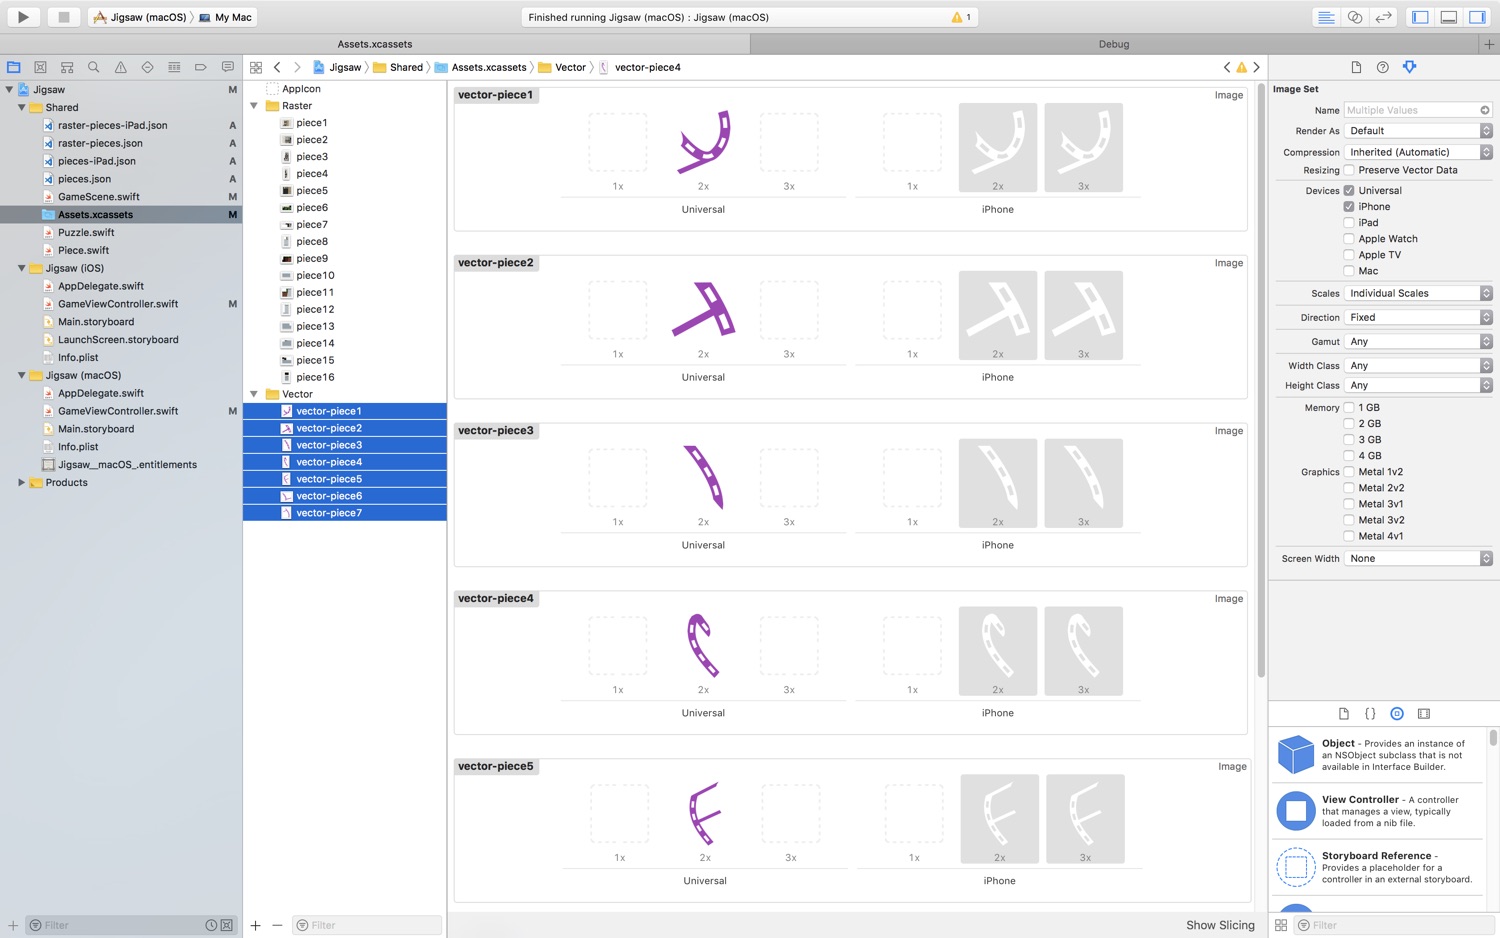 A screenshot of Xcode's Asset Catalog explorer. 7 items are highlighted which shows a summary of the images in the central pane. There is a purple, 2x Universal asset as well as 2x and 3x white iPhone assets.